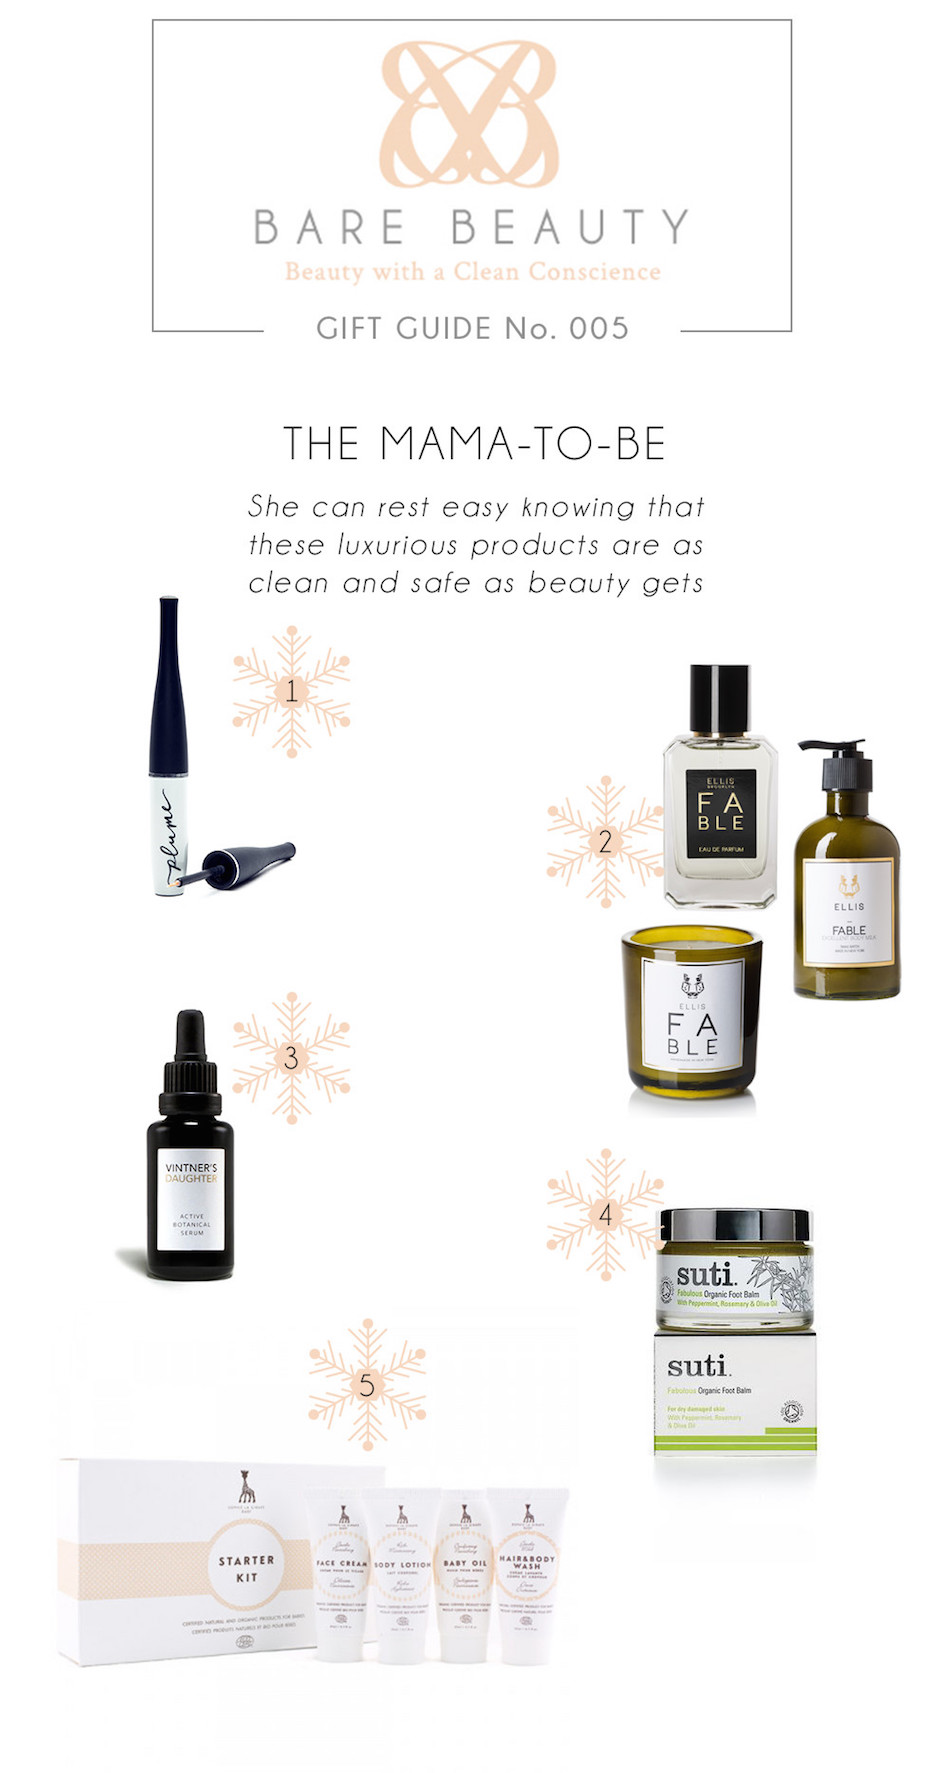 The Mama-to-Be Gift Guide on barebeauty.com